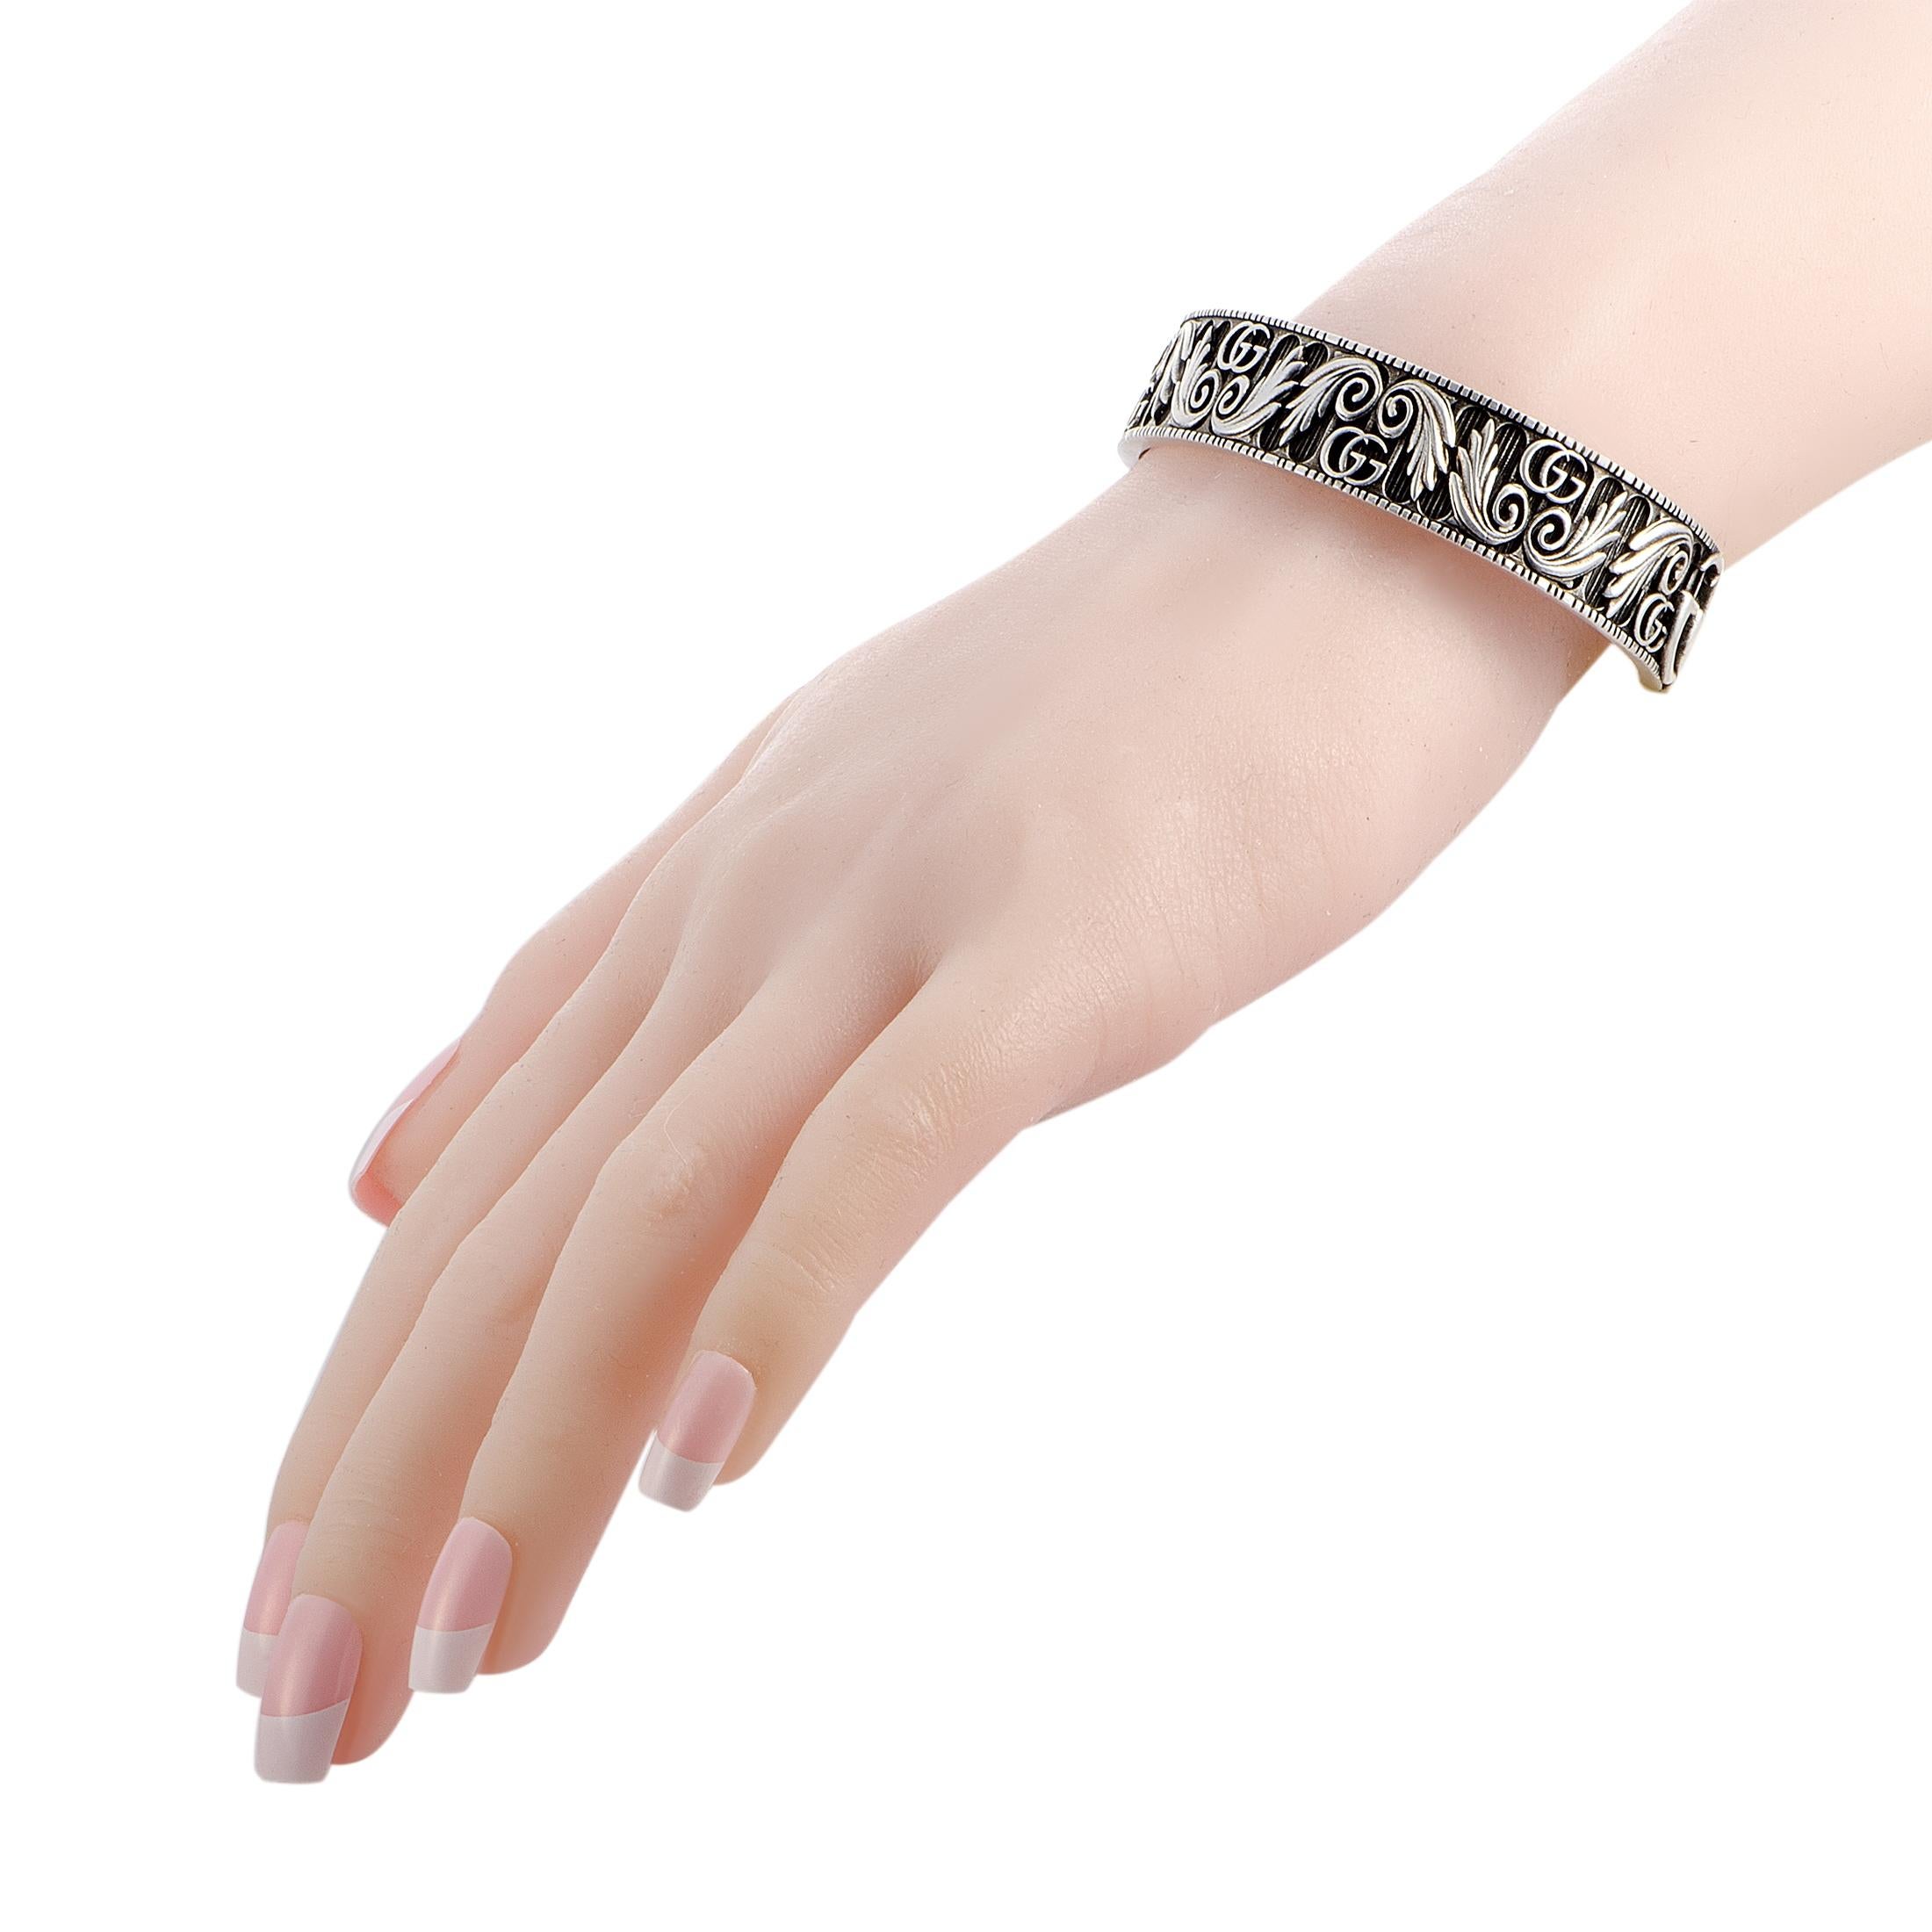 The Gucci “GG Marmont” bracelet is crafted from aged sterling silver and weighs 47 grams, measuring 7.85” in length and 2.50” in diameter.
 
 The bracelet is offered in brand new condition.
